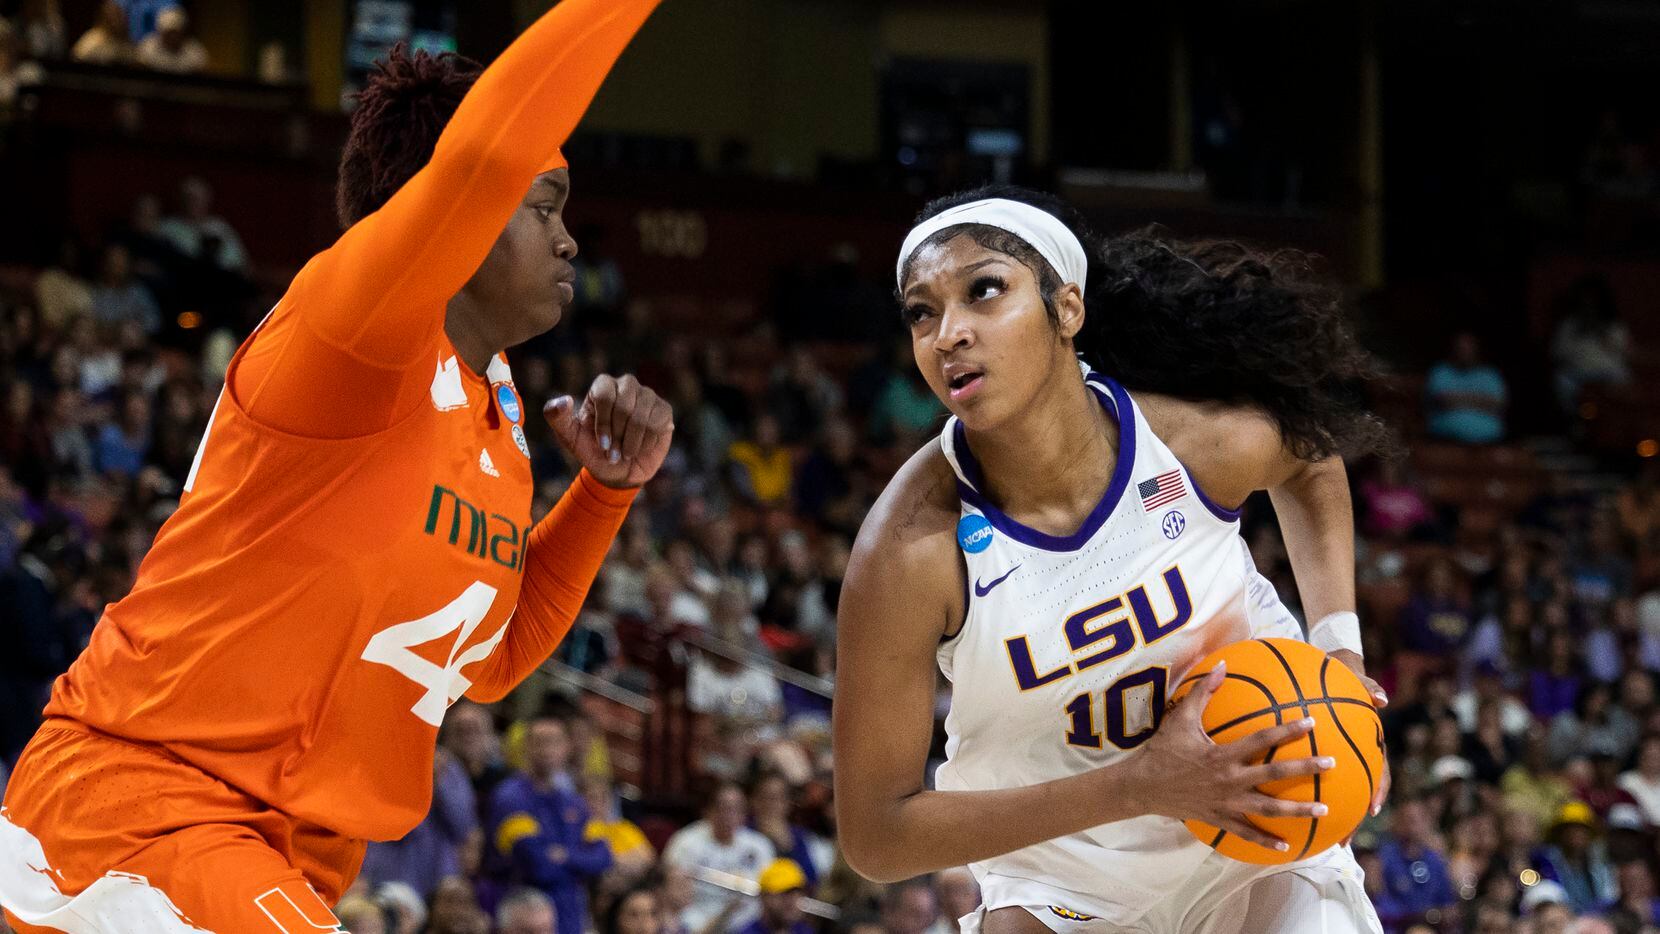 LSU's Angel Reese (10) goes up to shoot over Miami's Kyla Oldacre (44) in the first half of...